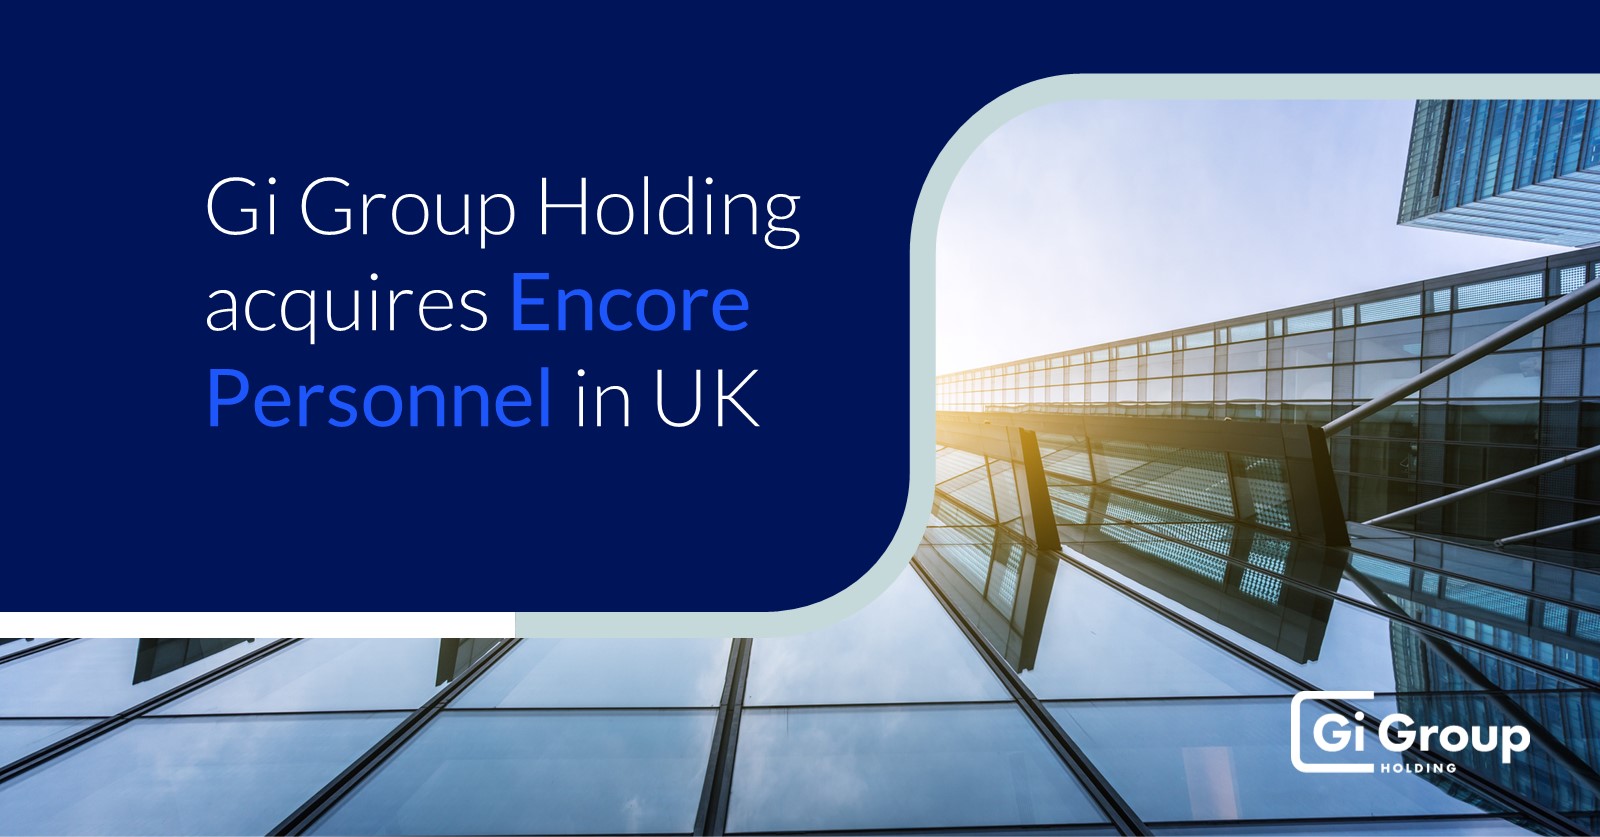 Gi Group Holding acquires Encore Personnel in UK